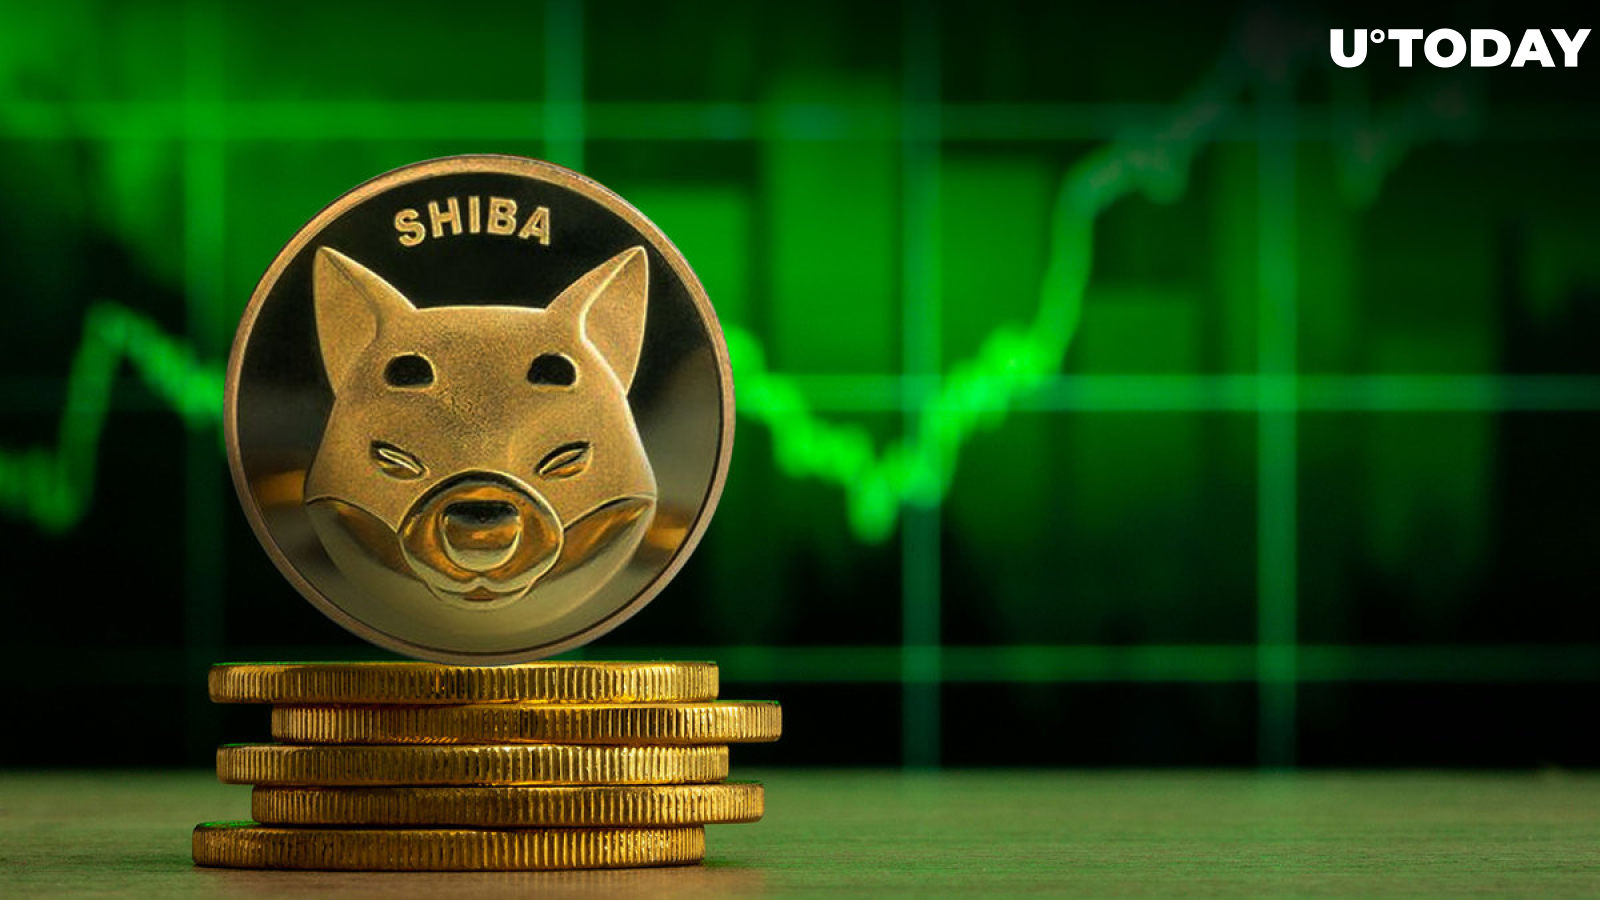 SHIB Price Goes Green as Coin Becomes One of Most Purchased Assets